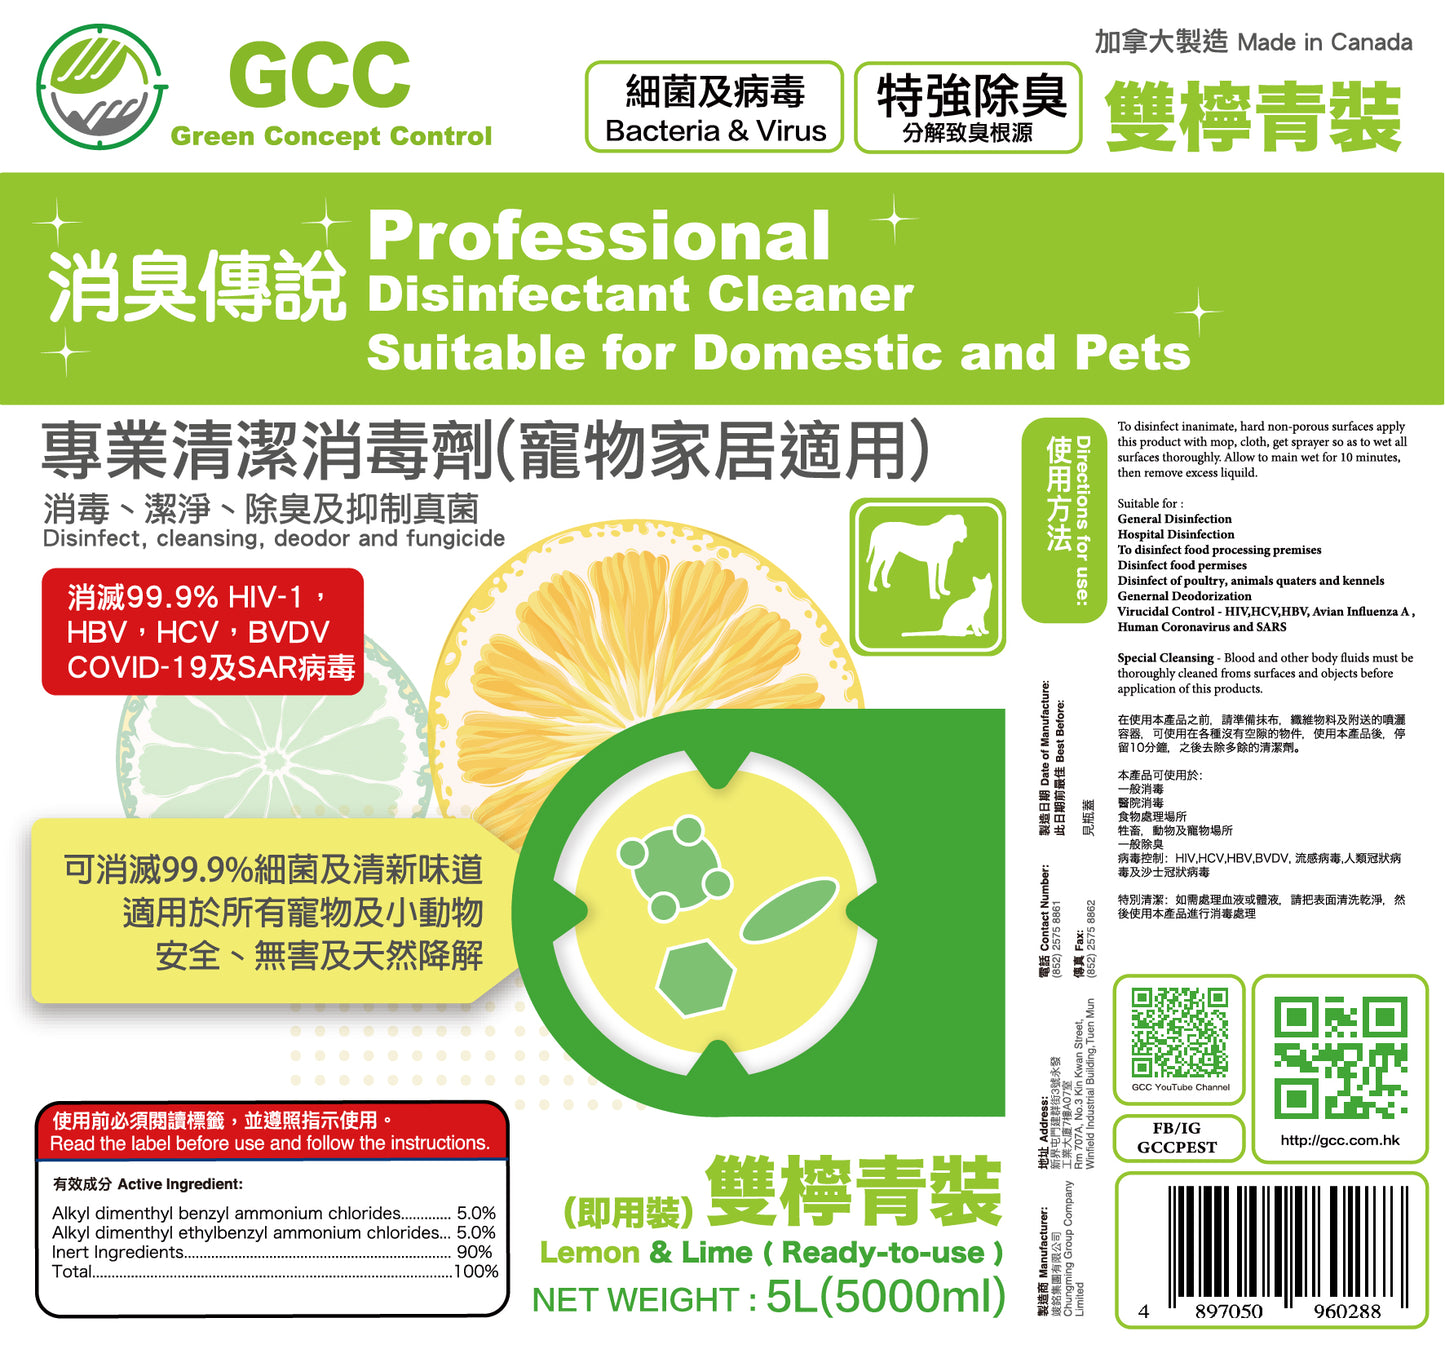 GCC Professional Disinfectant Cleaner (Suitable for Domestic and Pet ) 2.5L (liter)